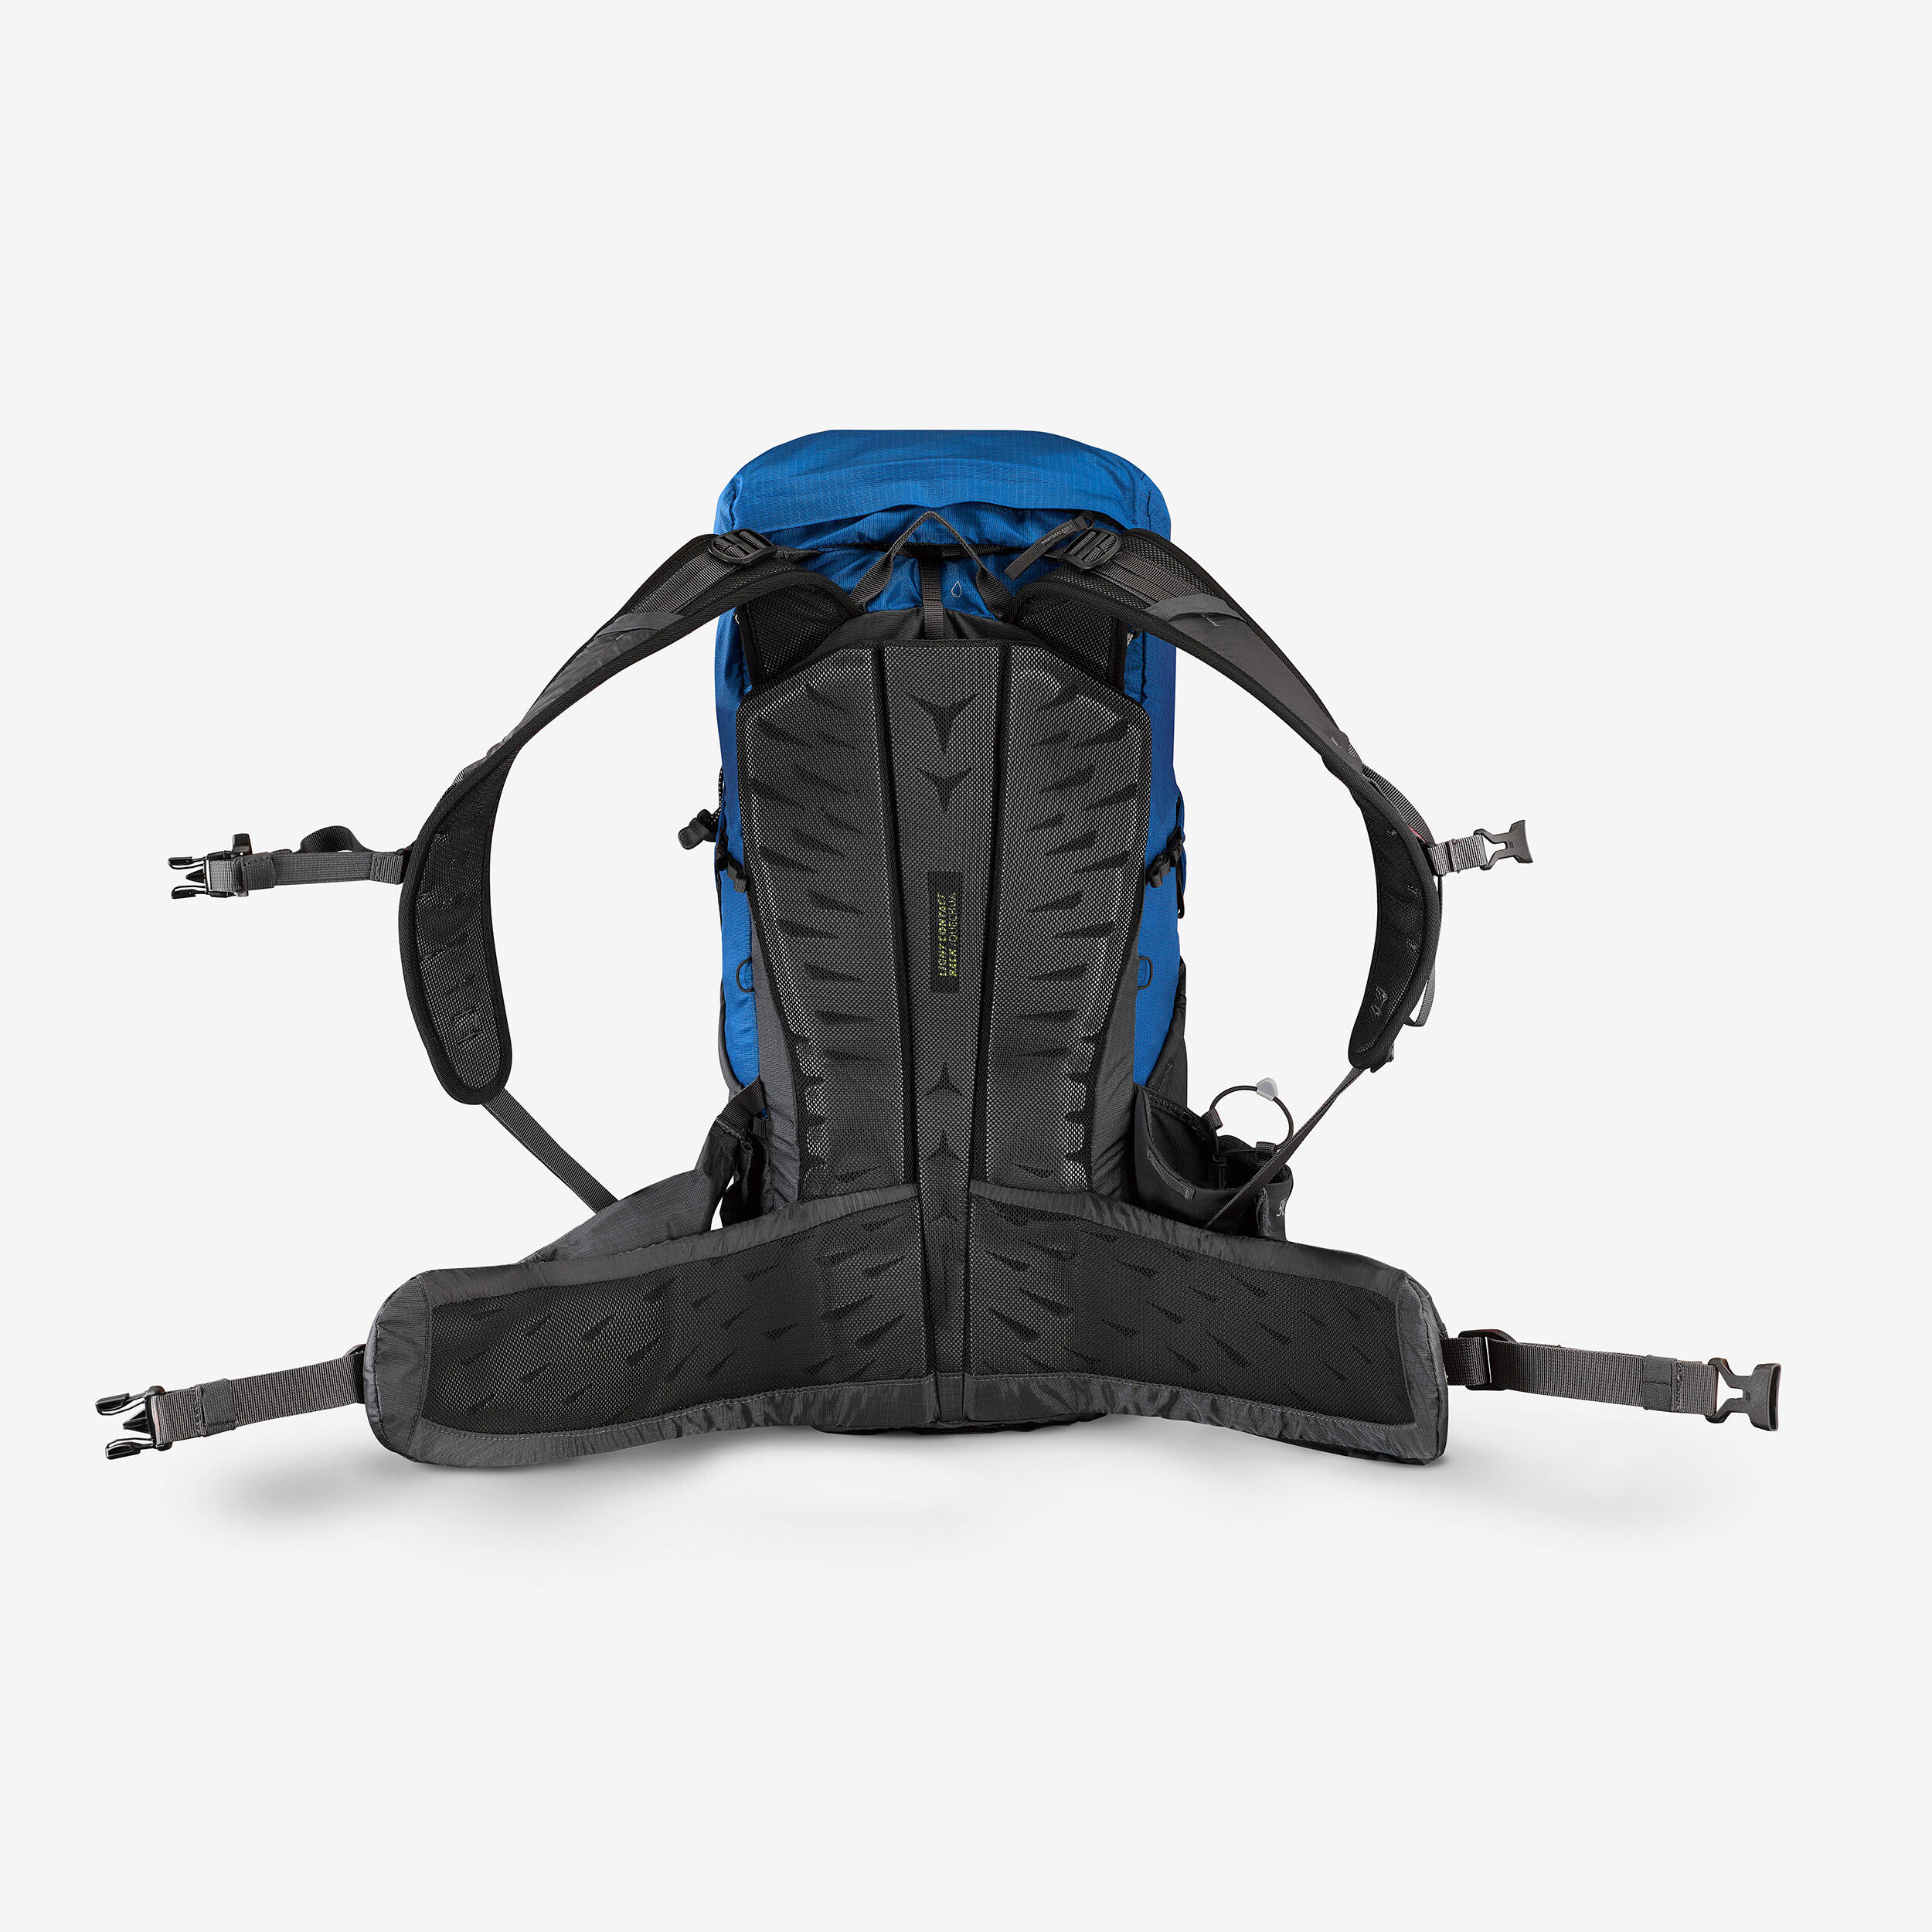 Mountain hiking backpack 25L - MH900 8/18